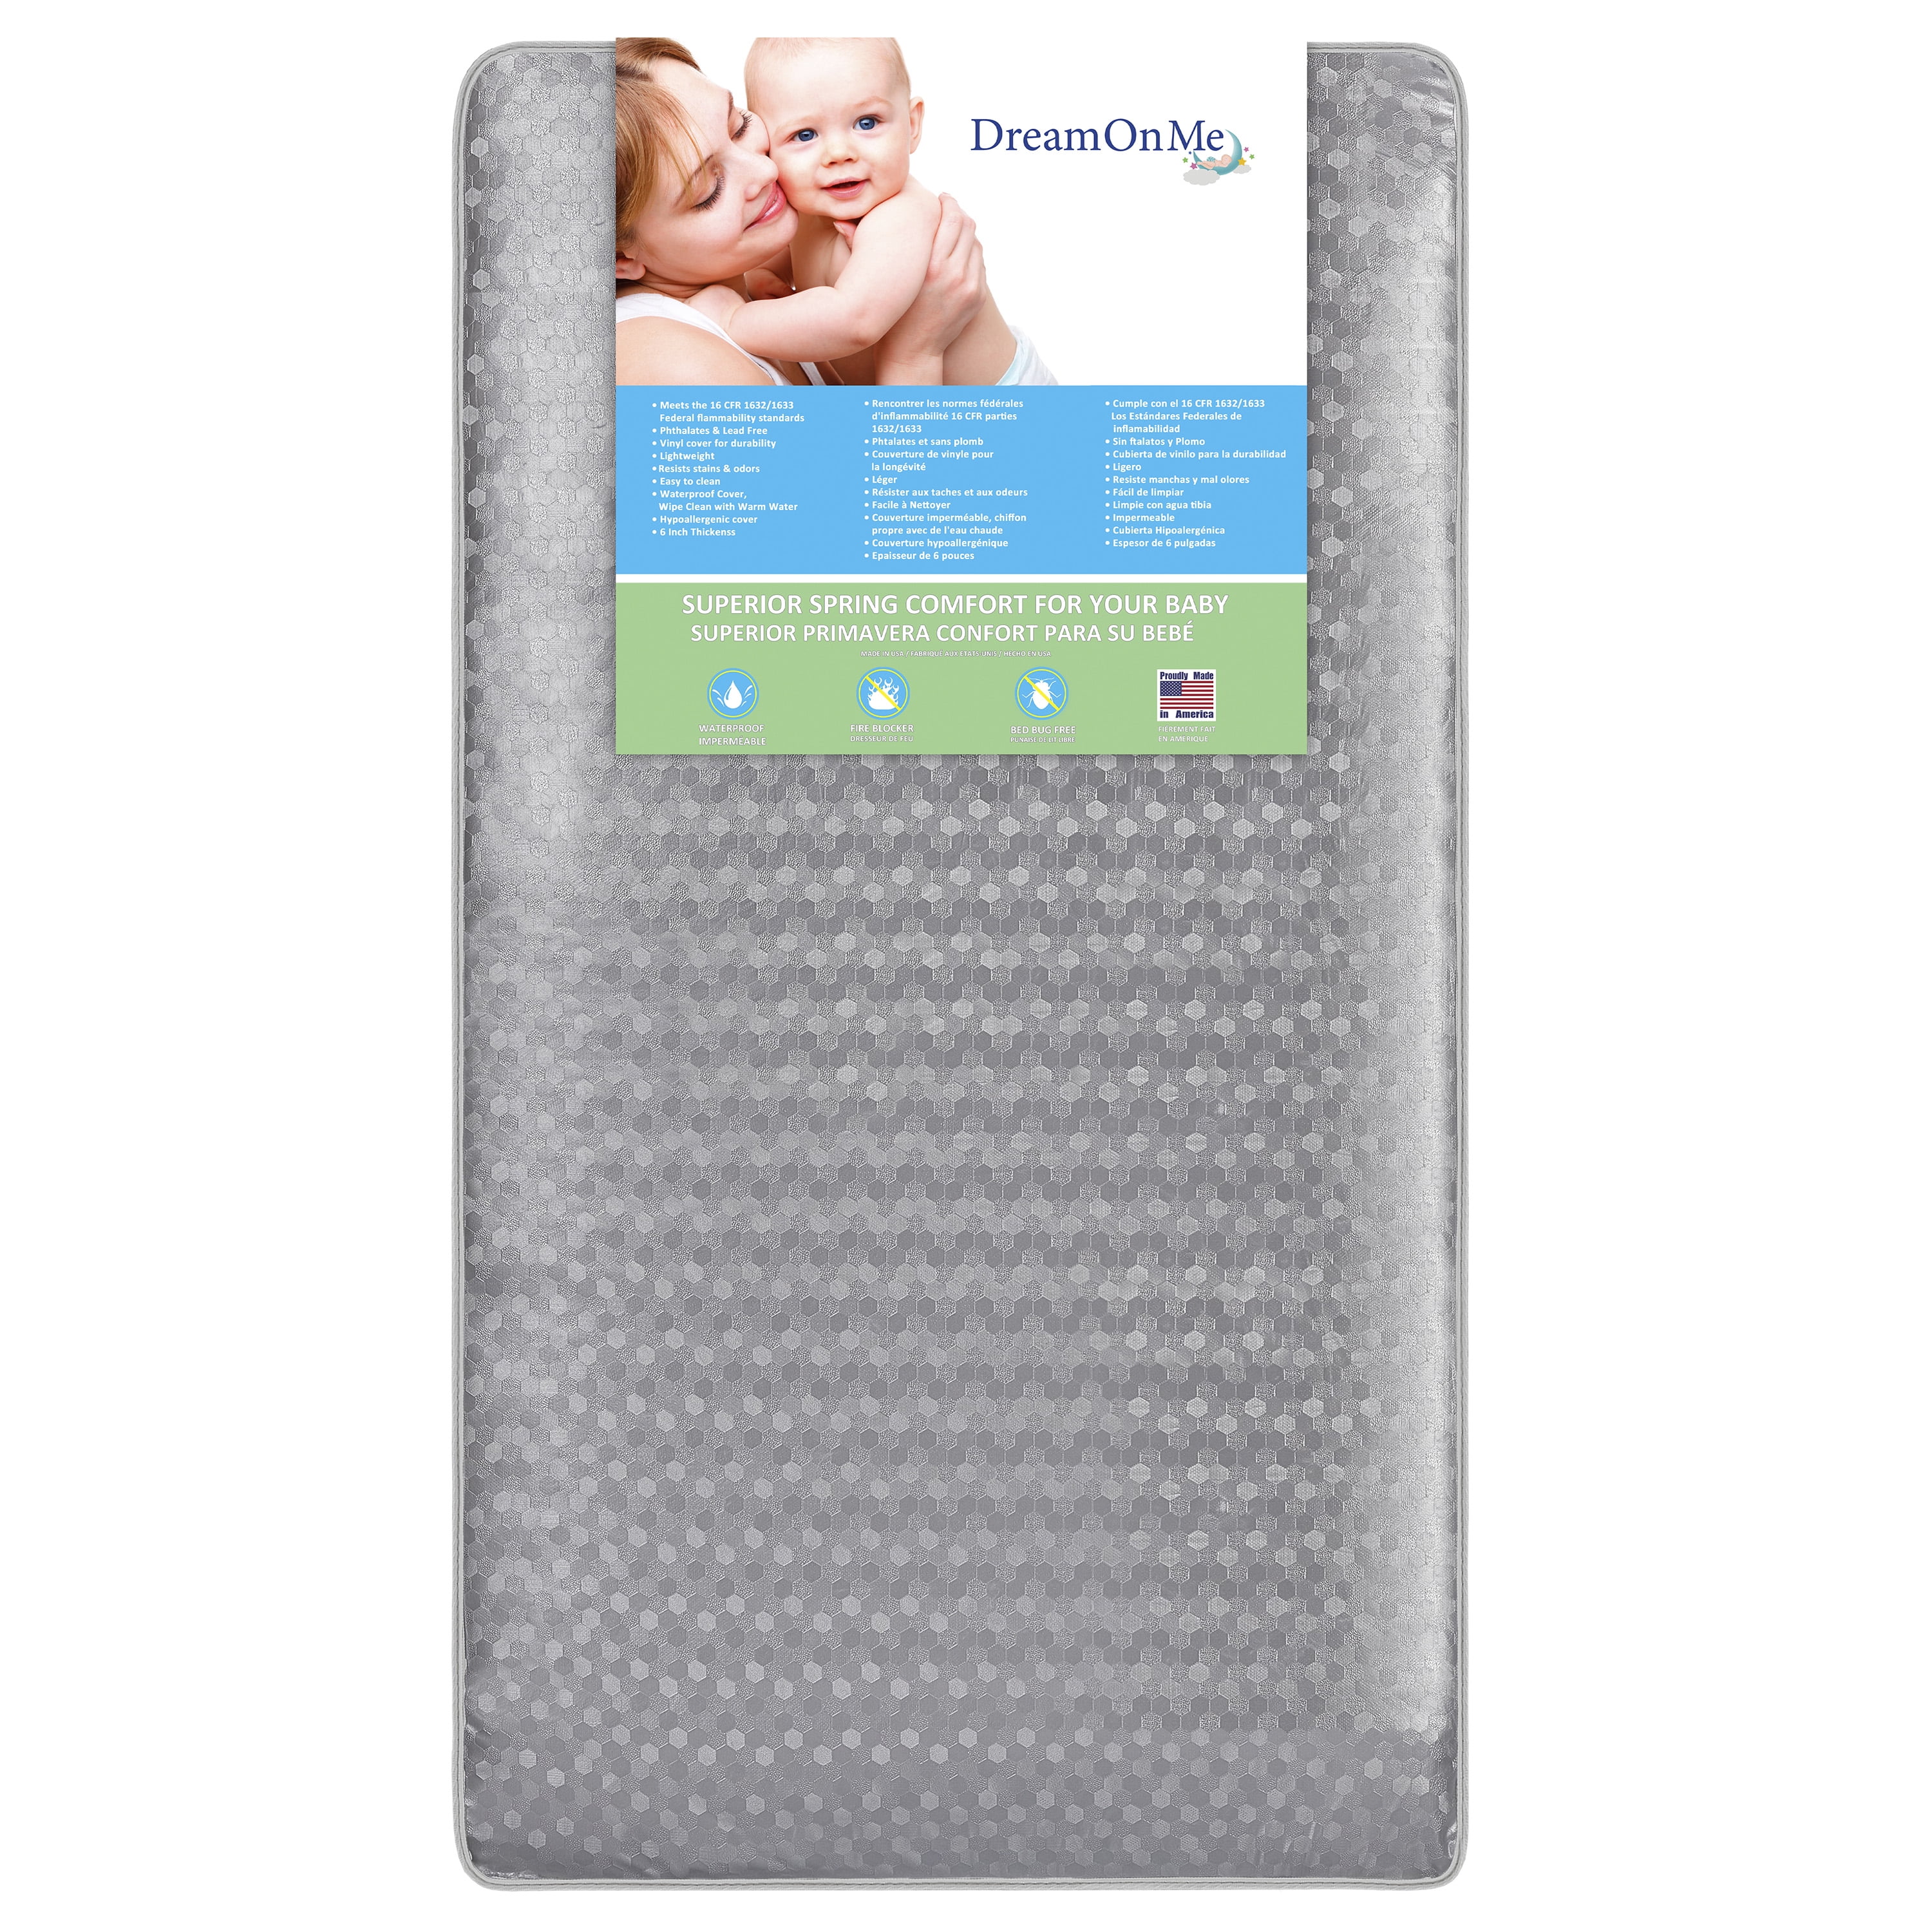 SALE／56%OFF】 Y's SHOP店特別価格Dream On Me, Nirvana 96 Coil Inner Spring Crib  And Toddler Mattress I Waterproof Green Guard Gold Certified 10 Years  Manufact好評販売中